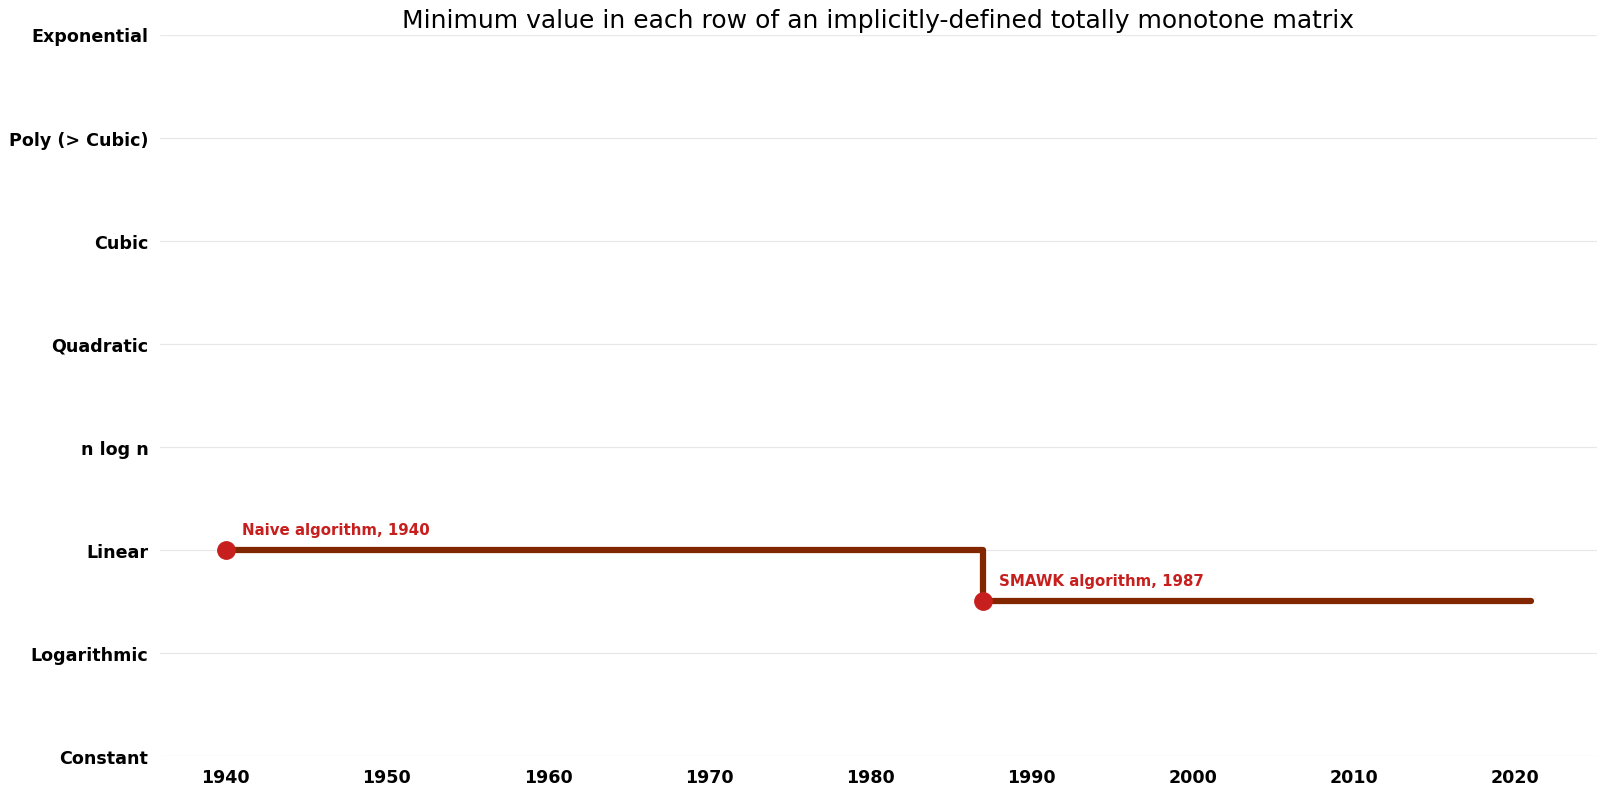 File:Minimum value in each row of an implicitly-defined totally monotone matrix - Time.png